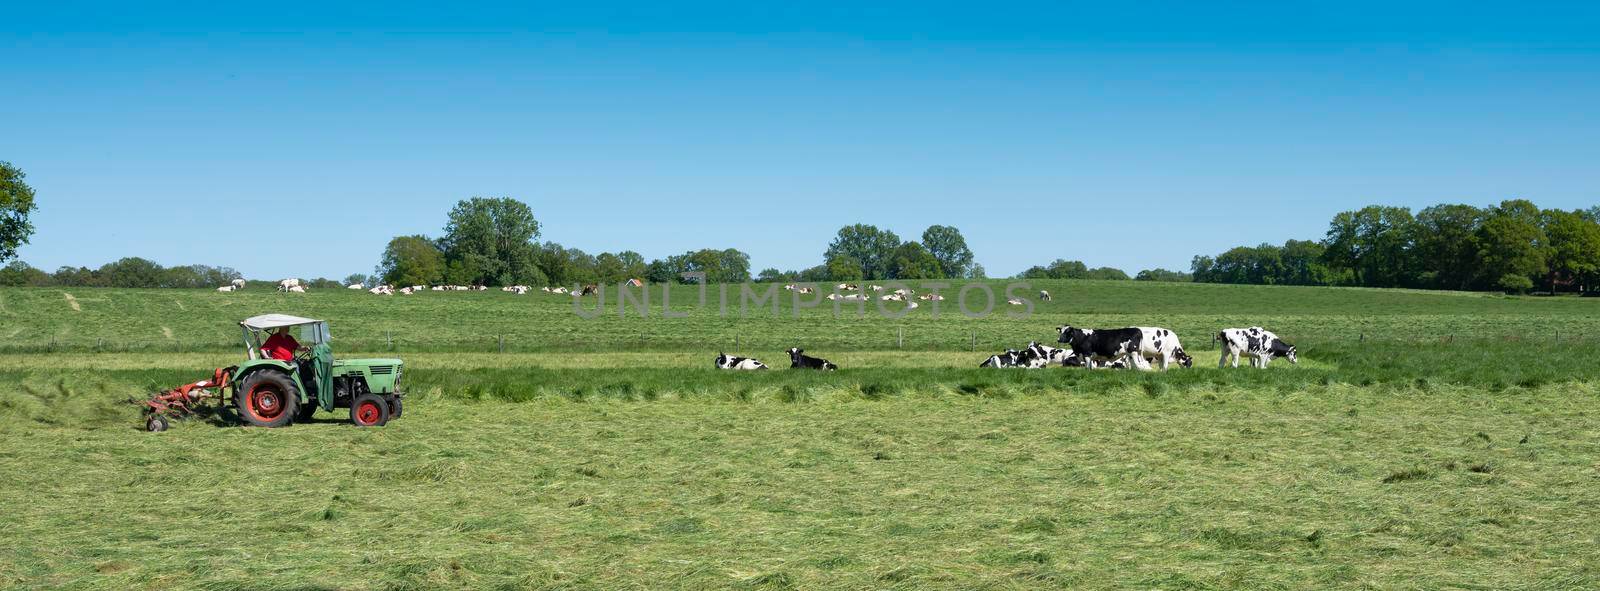 farmer mows grass near spotted cows between oldenzaal and enschede in twente by ahavelaar